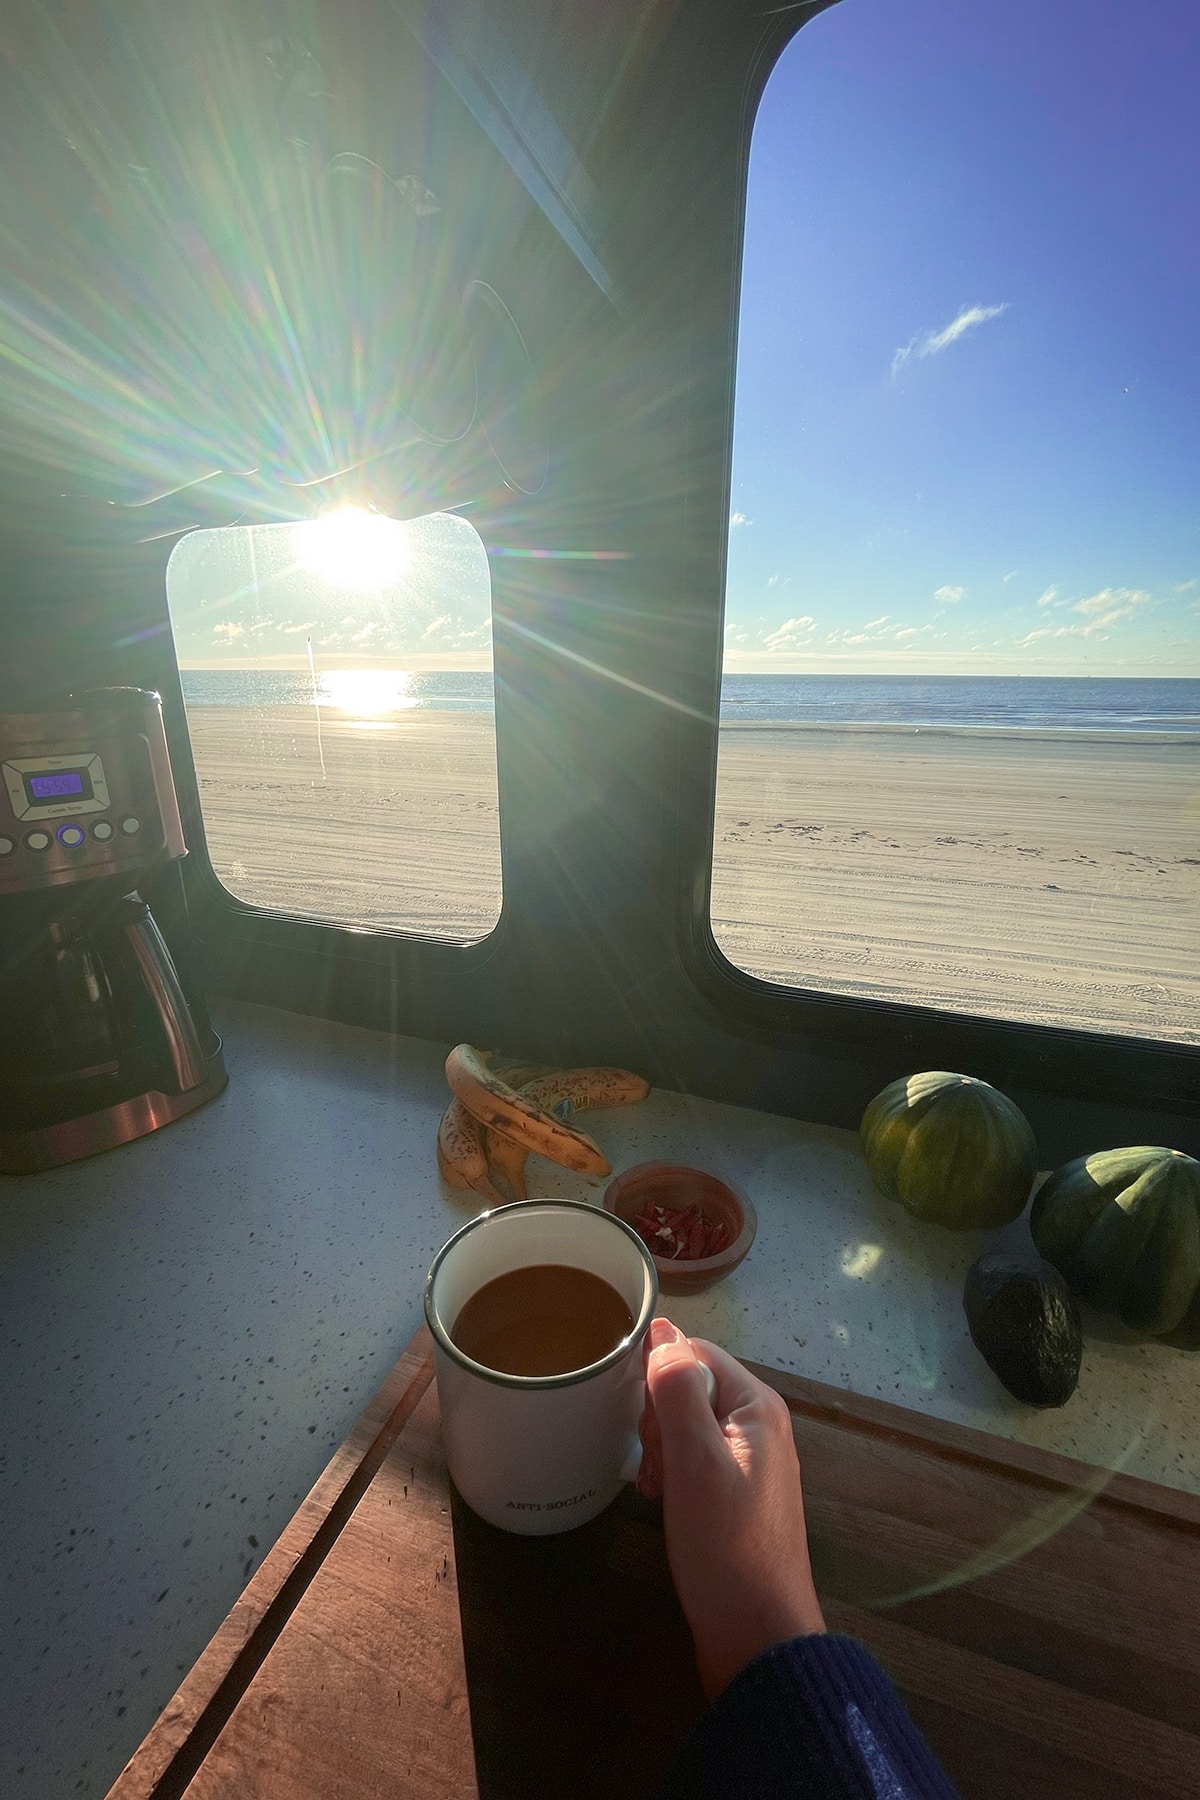 Looking out the kitchen window of my 5th wheel RV at Crystal Beach in Texas.